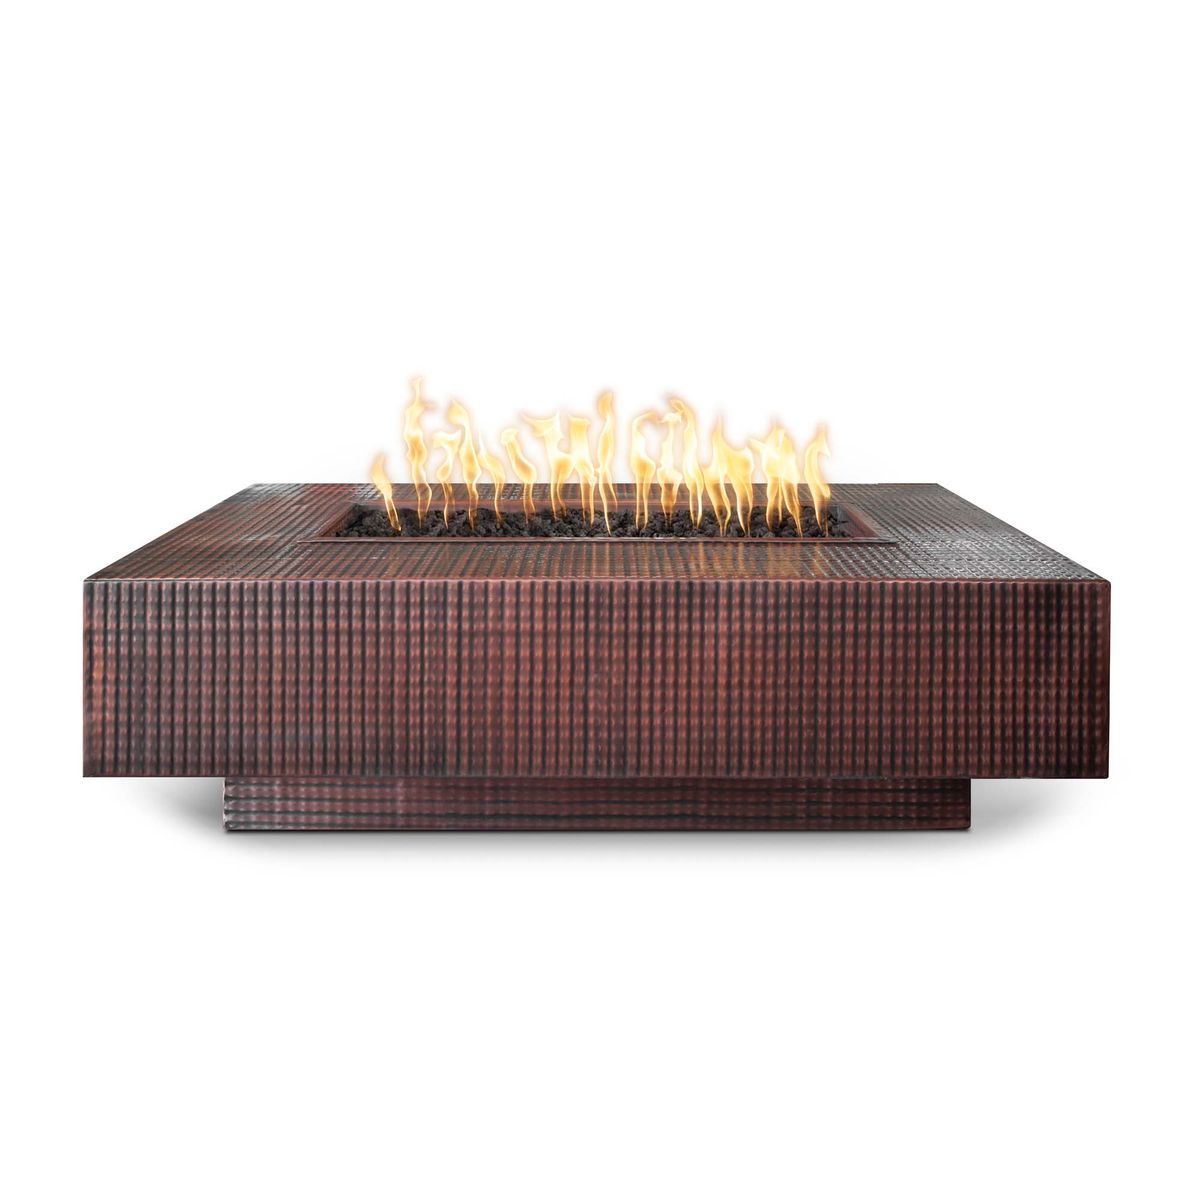 The Outdoor Plus Linear Cabo Fire Pit - Hammered Copper - OPT-CBLNCPR freeshipping - Luxury Tech Inc.